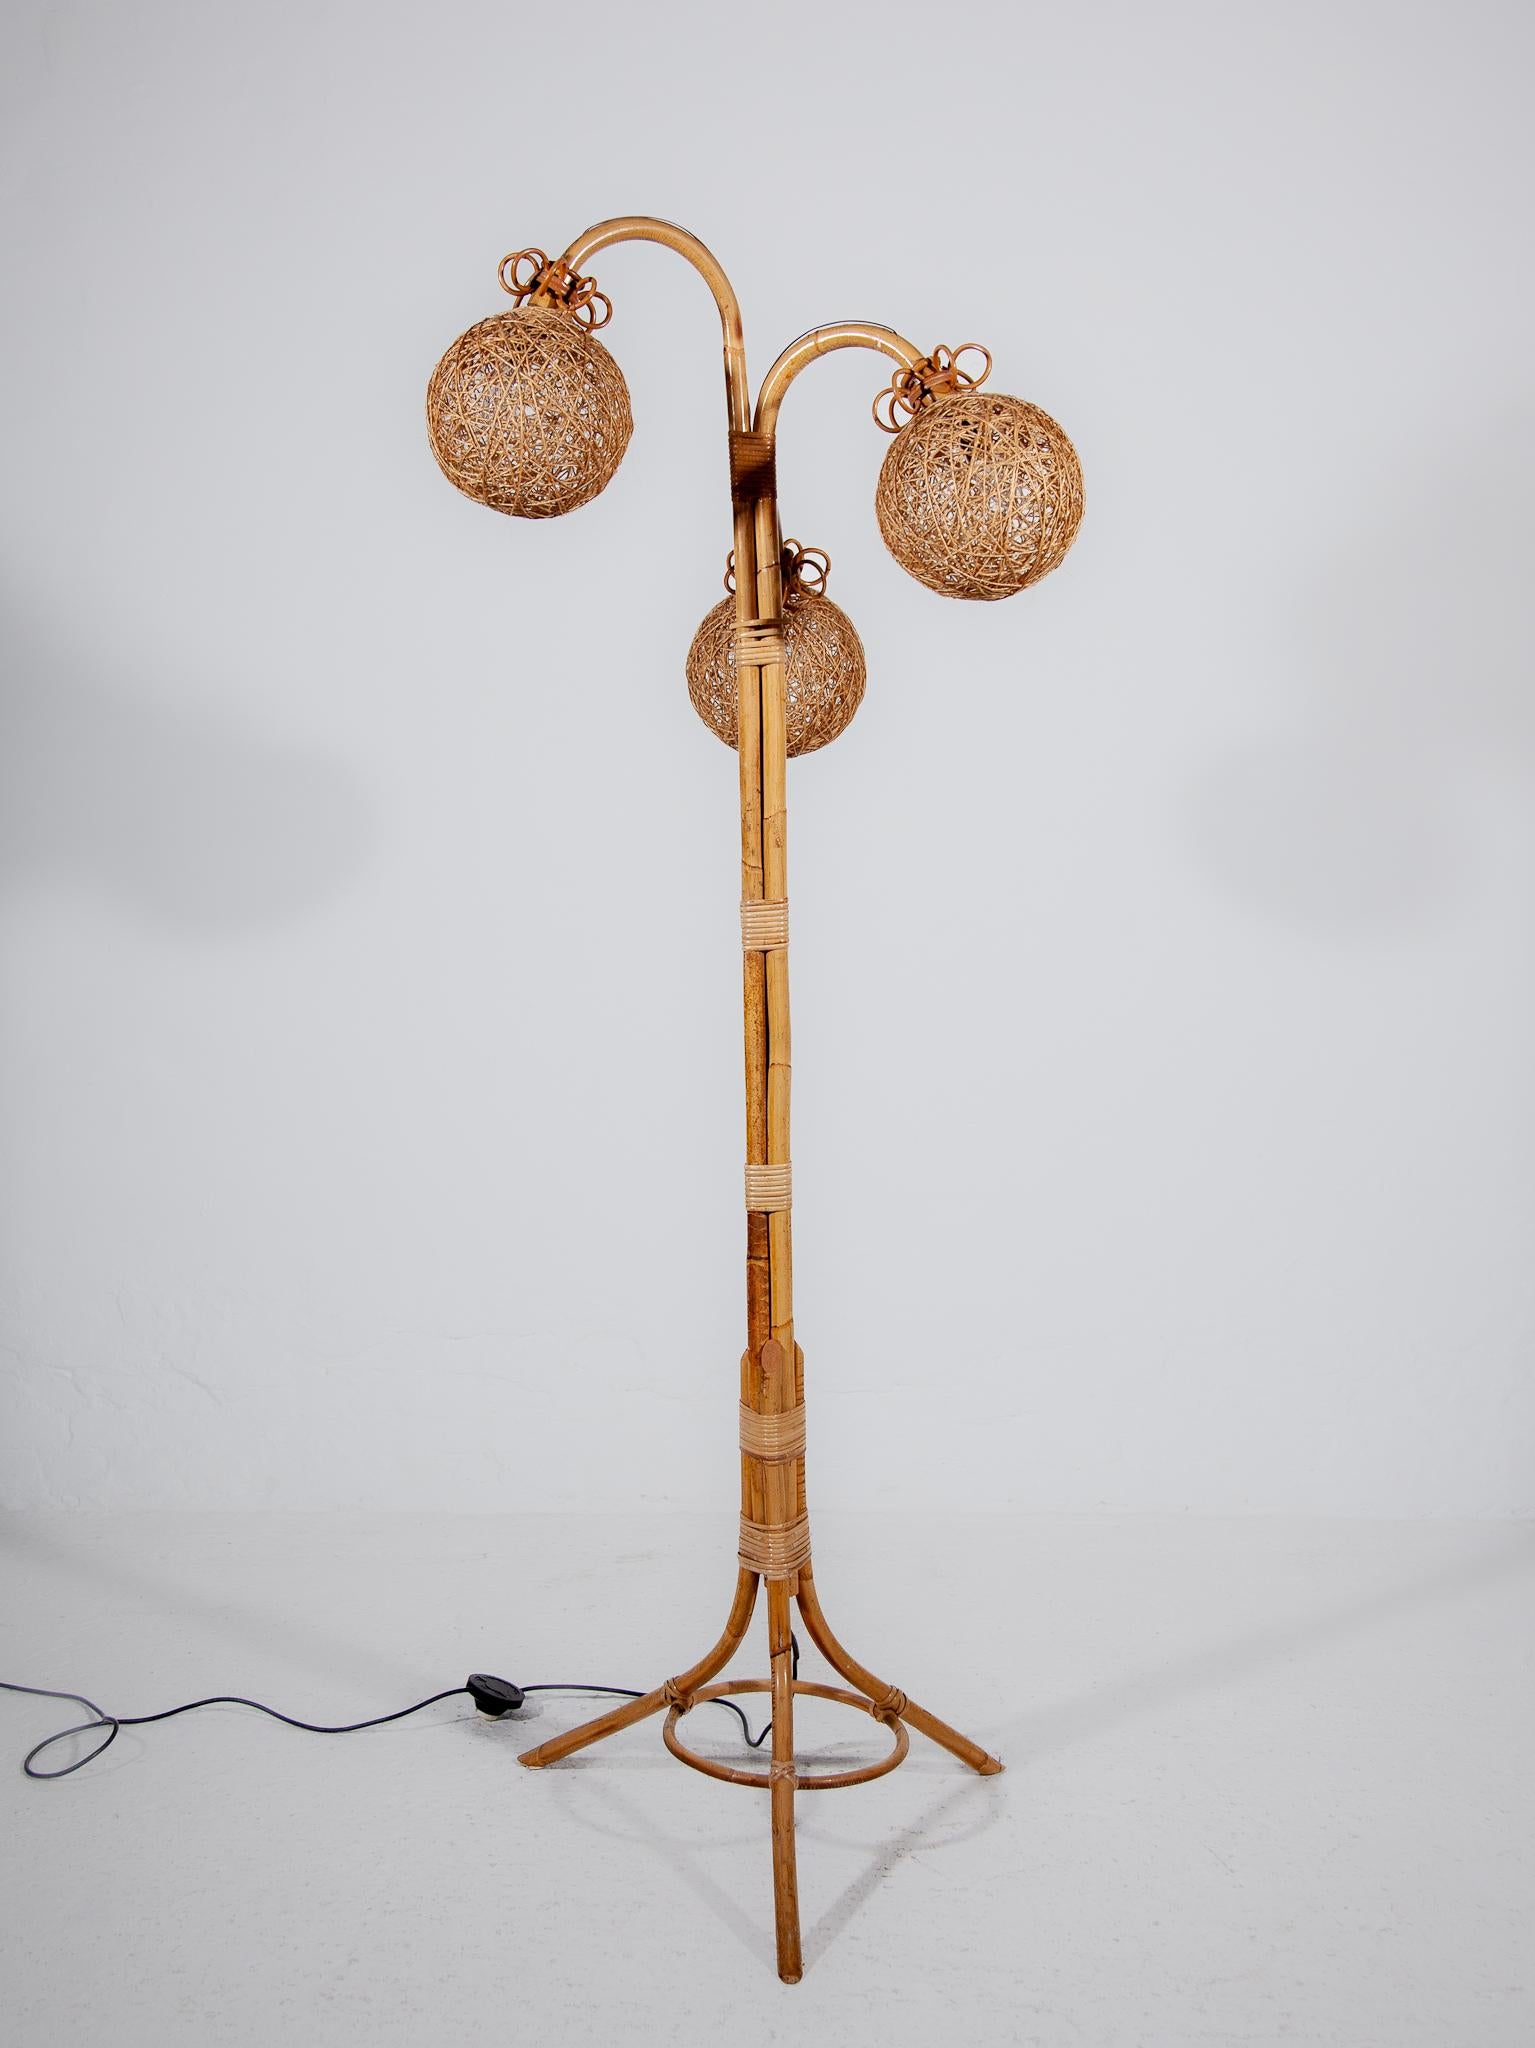 Hand-Crafted Bamboo BOHO style Floorlamp, France 1970s, Three Wicker Globes